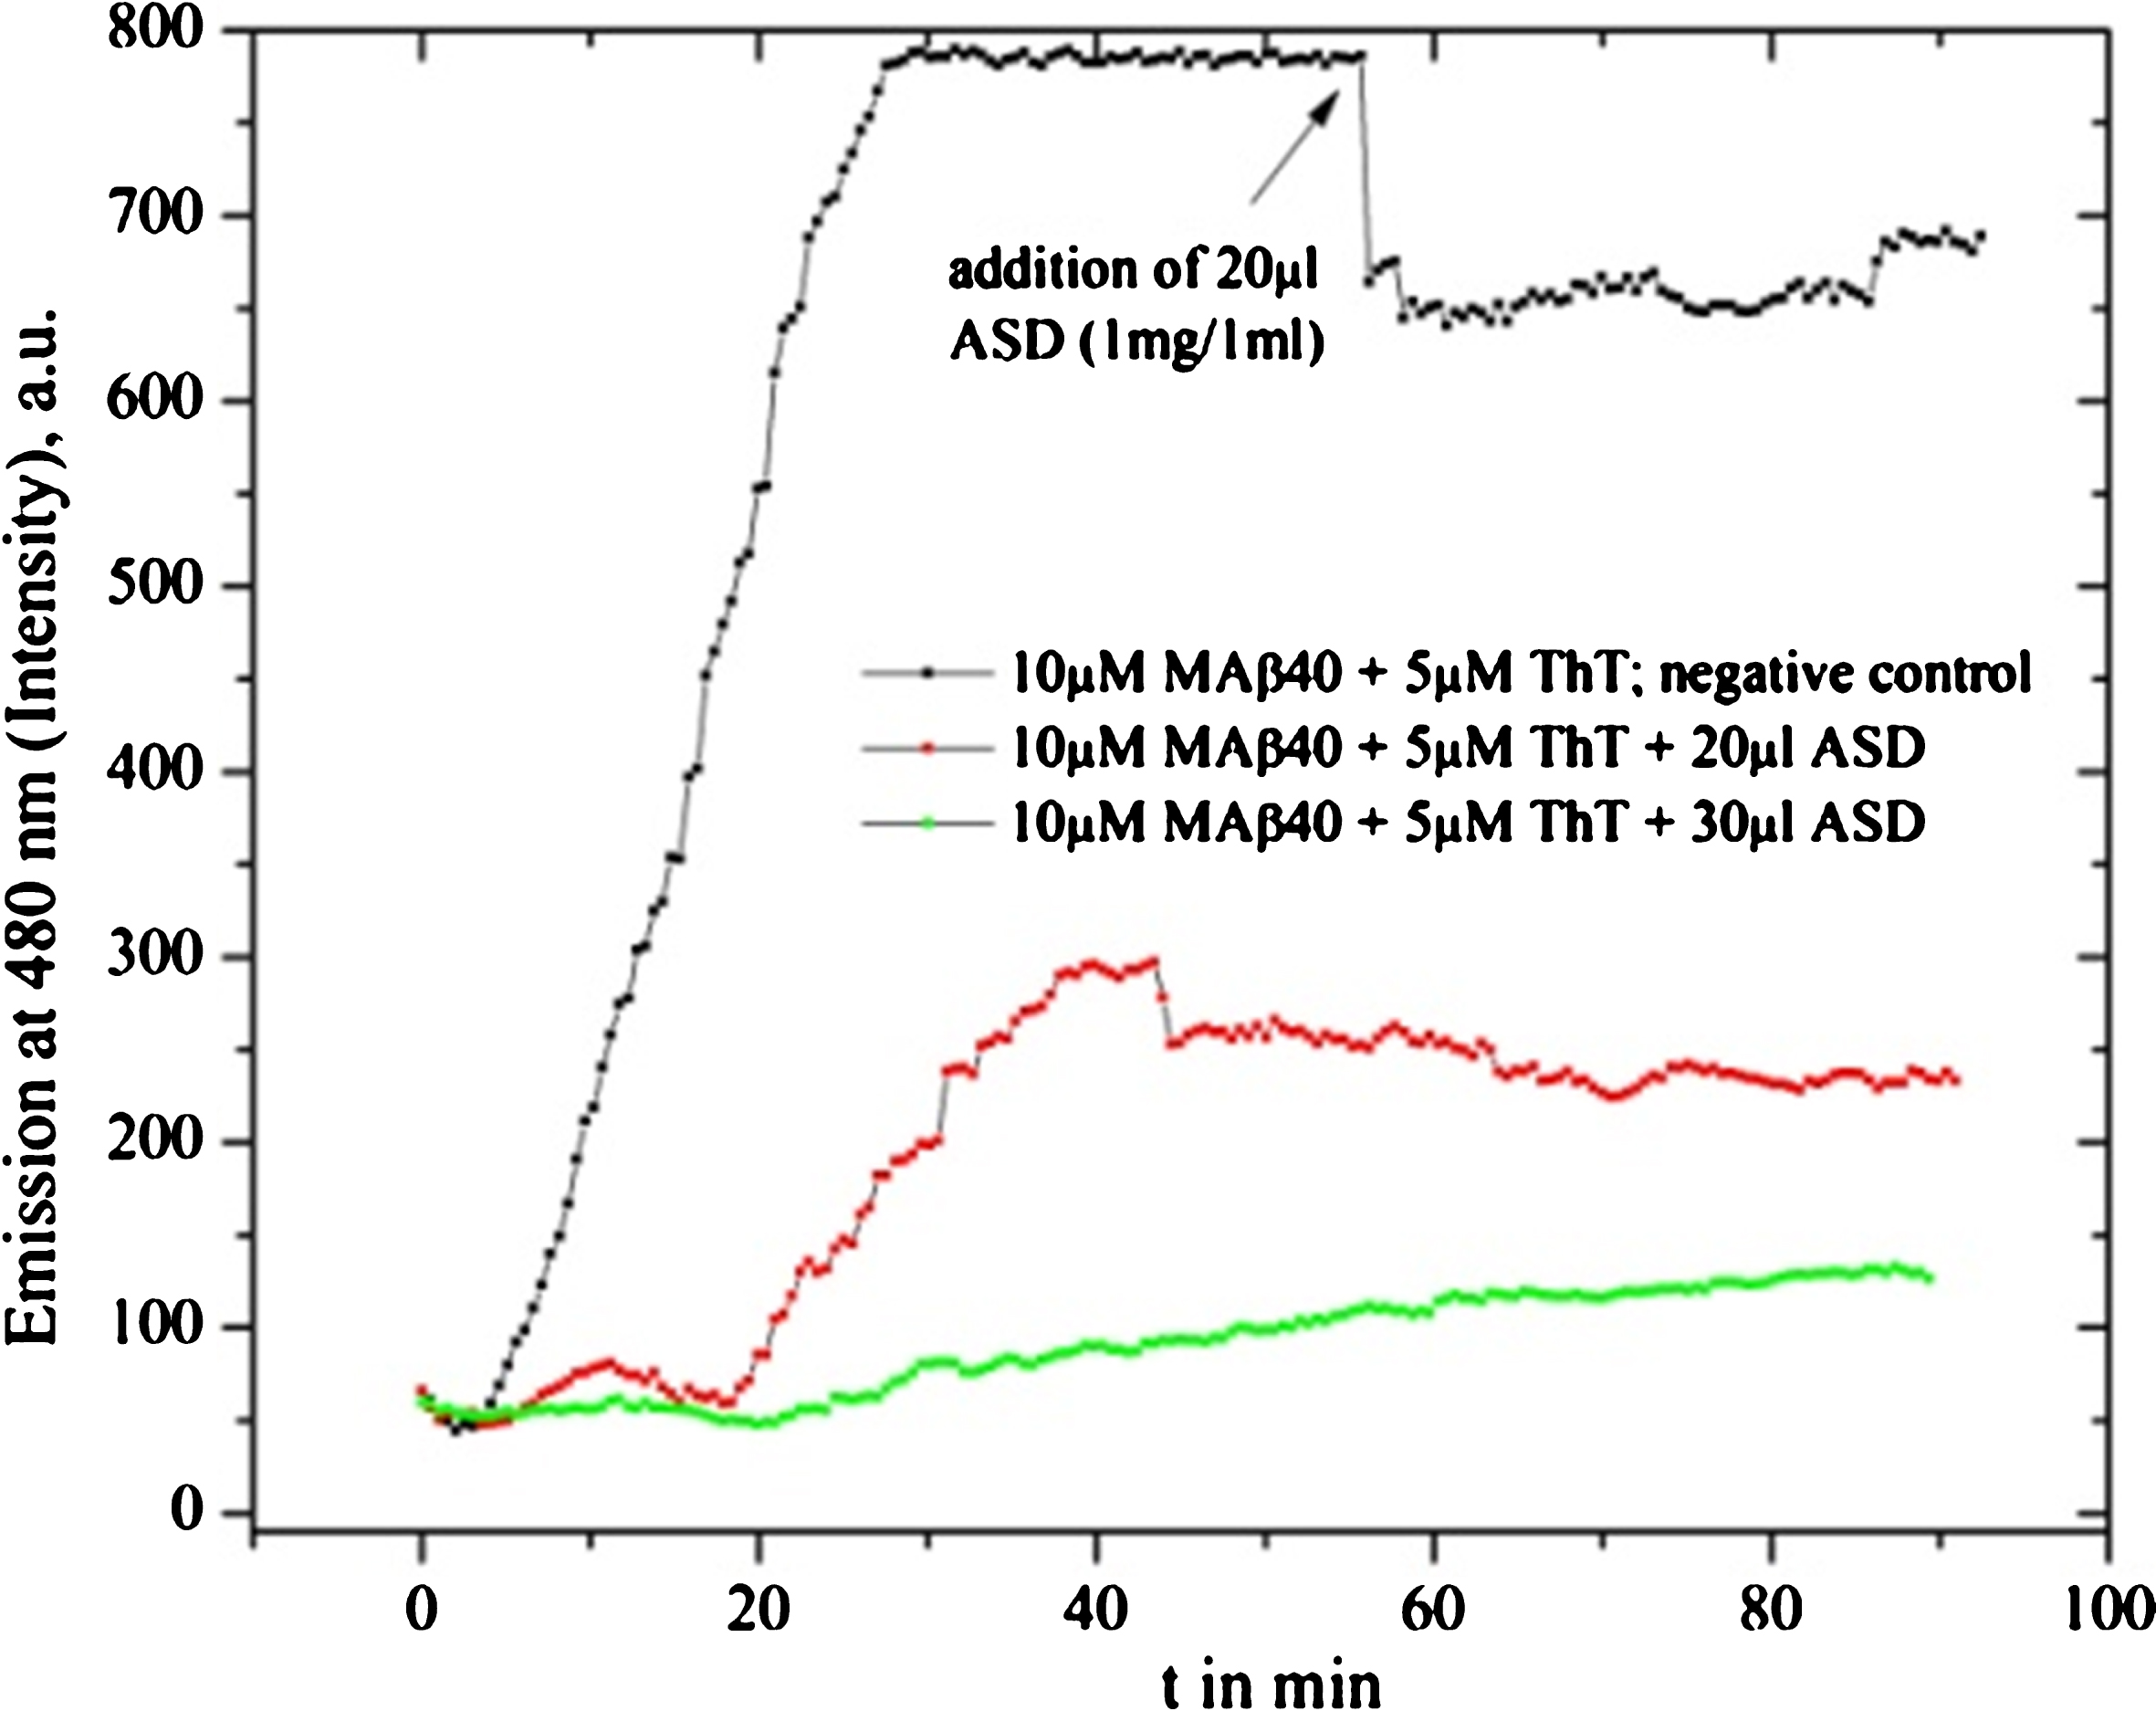 Fluorescence graph of Ashwangandha drug powder (ASD) solvent (1 mg in 1 ml) inhibition test: redline shows the MAβ40 fibrillation process with an added inhibitor substance of 20 μl at the start of the fibrillation test, the green curve with added 30 μl and the black line shows the negative reference of pure fibril formation.